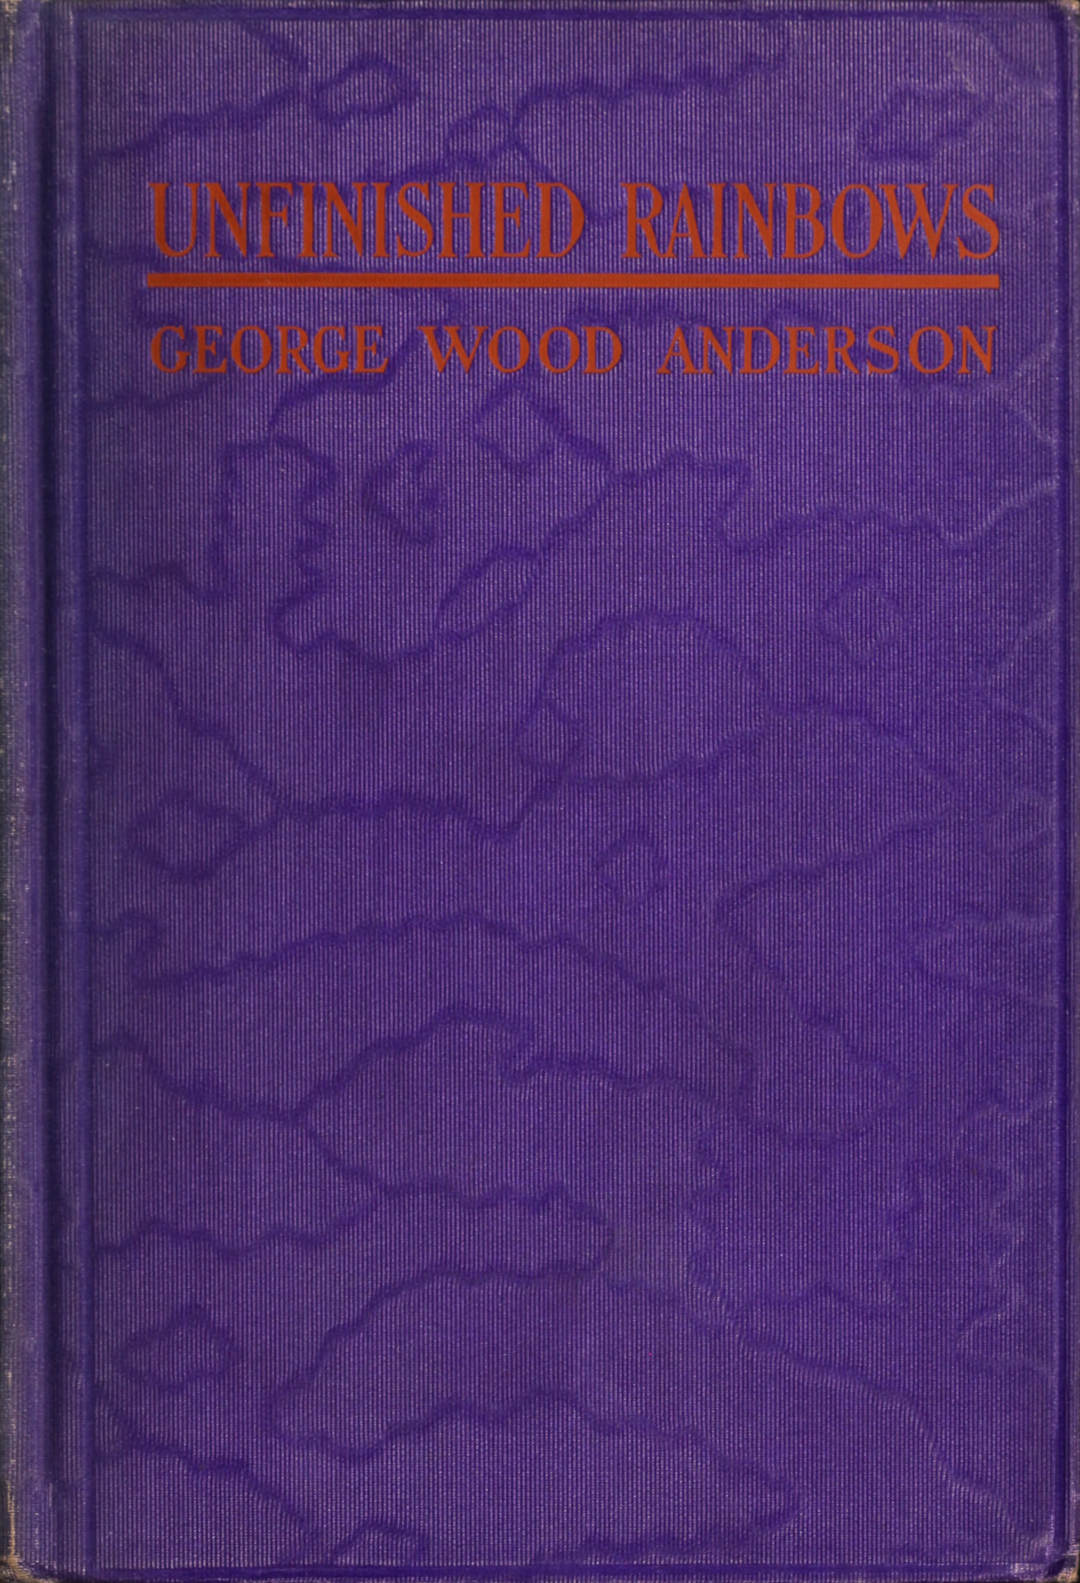 Book cover, with the text “Unfinished Rainbows, George Wood Anderson” in red on a textured purple background.